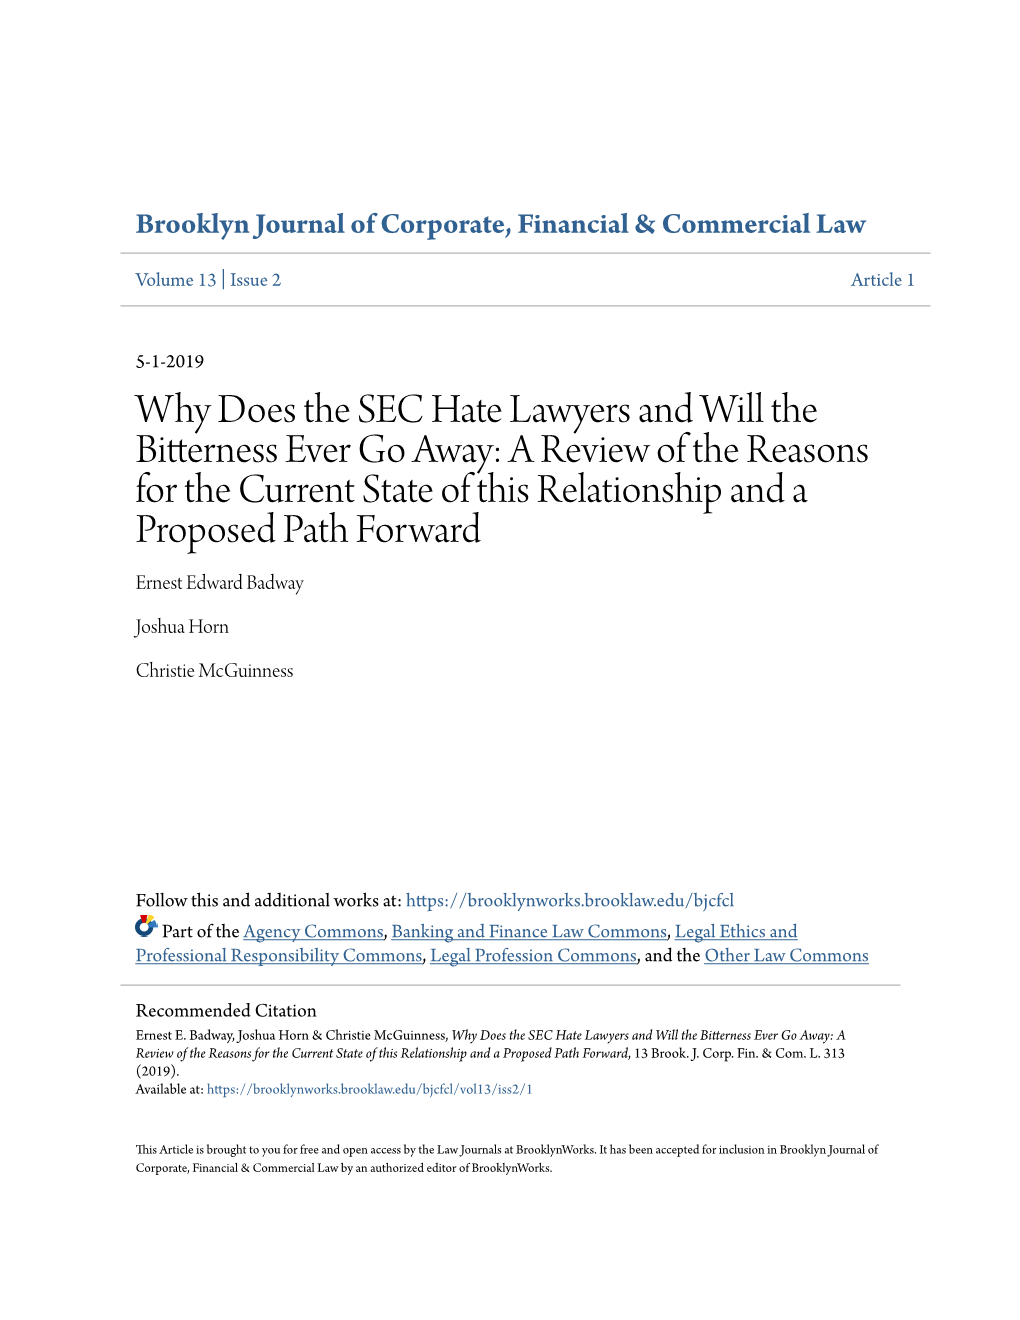 Why Does the SEC Hate Lawyers